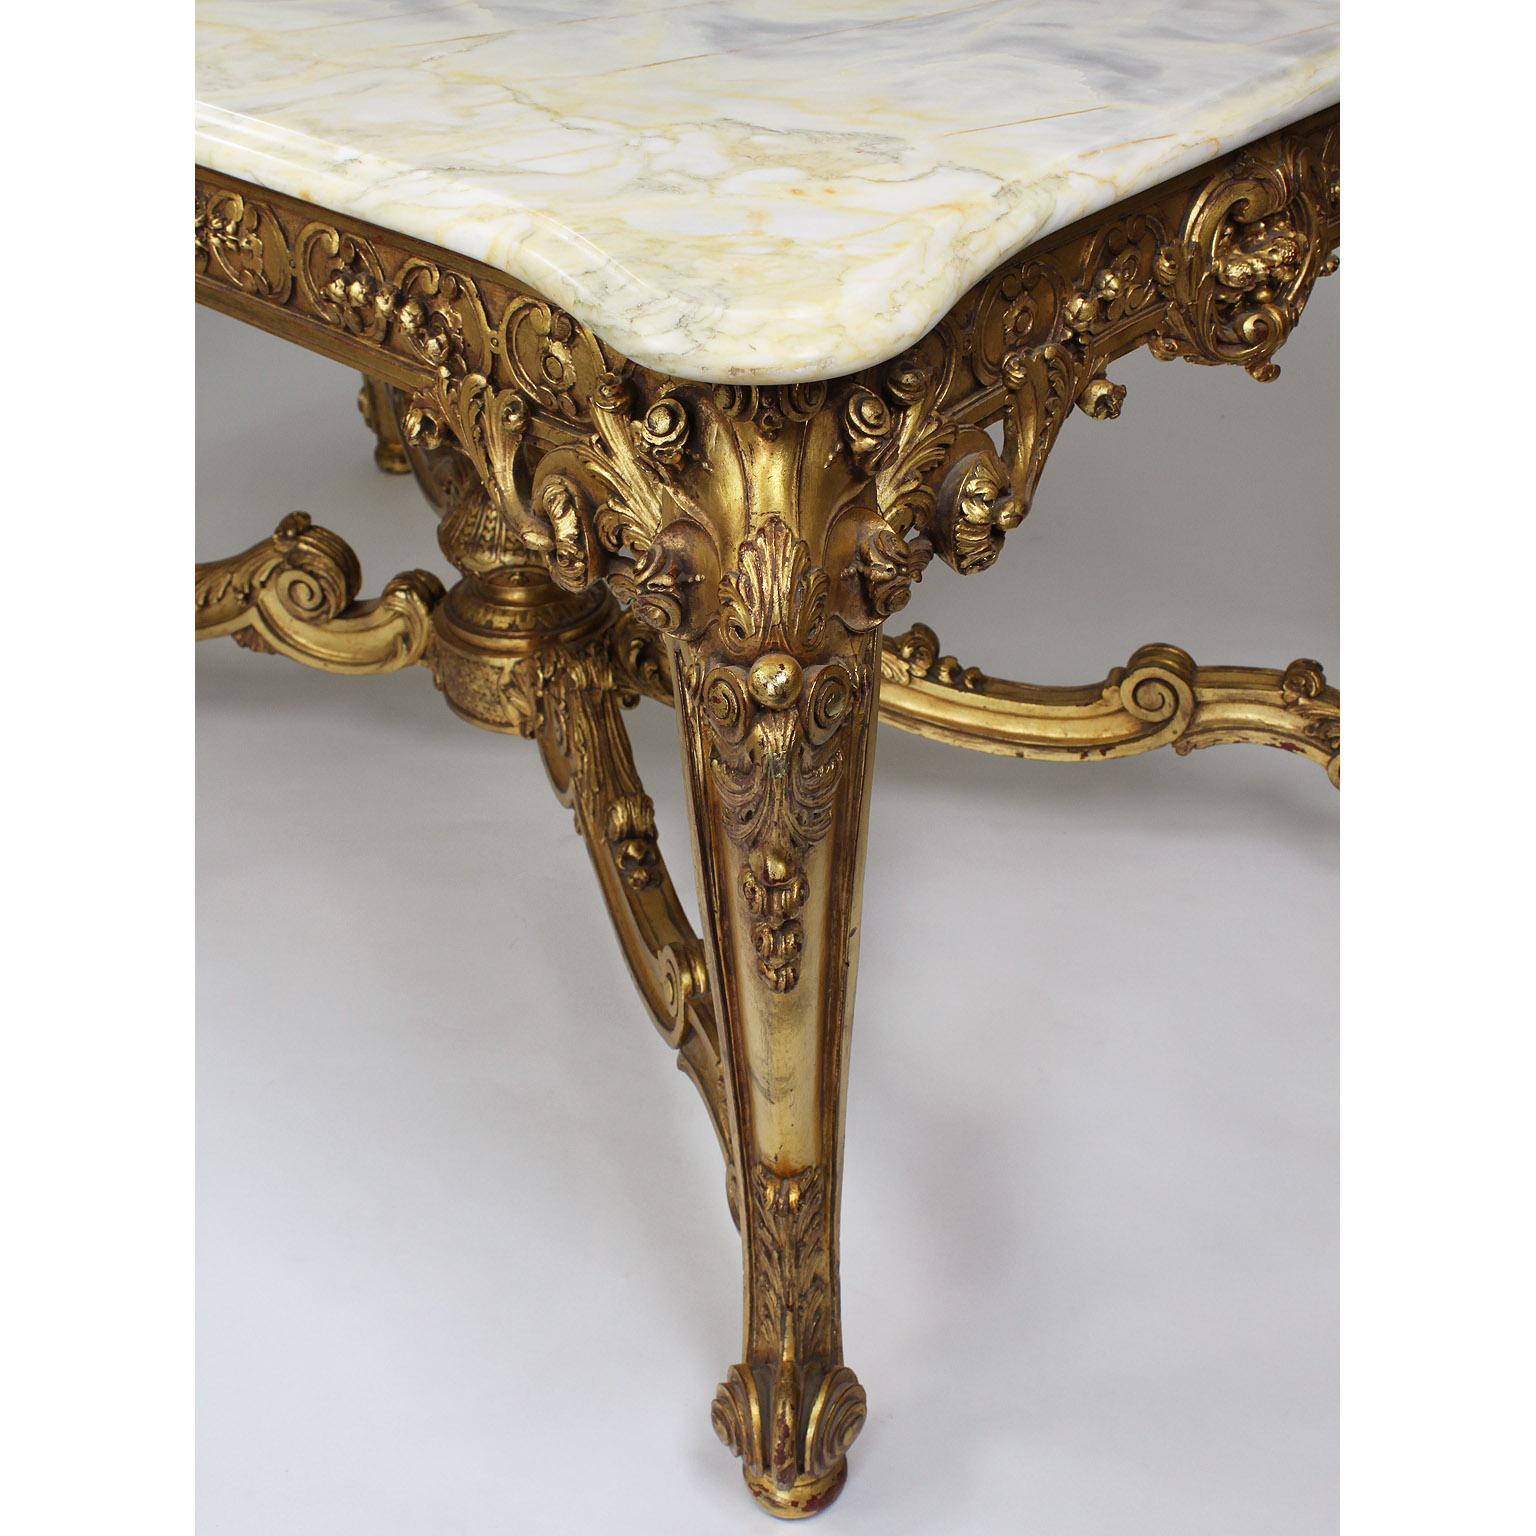 Fine French 19th-20th Century Louis XV Style Giltwood Carved Center Hall Table For Sale 1